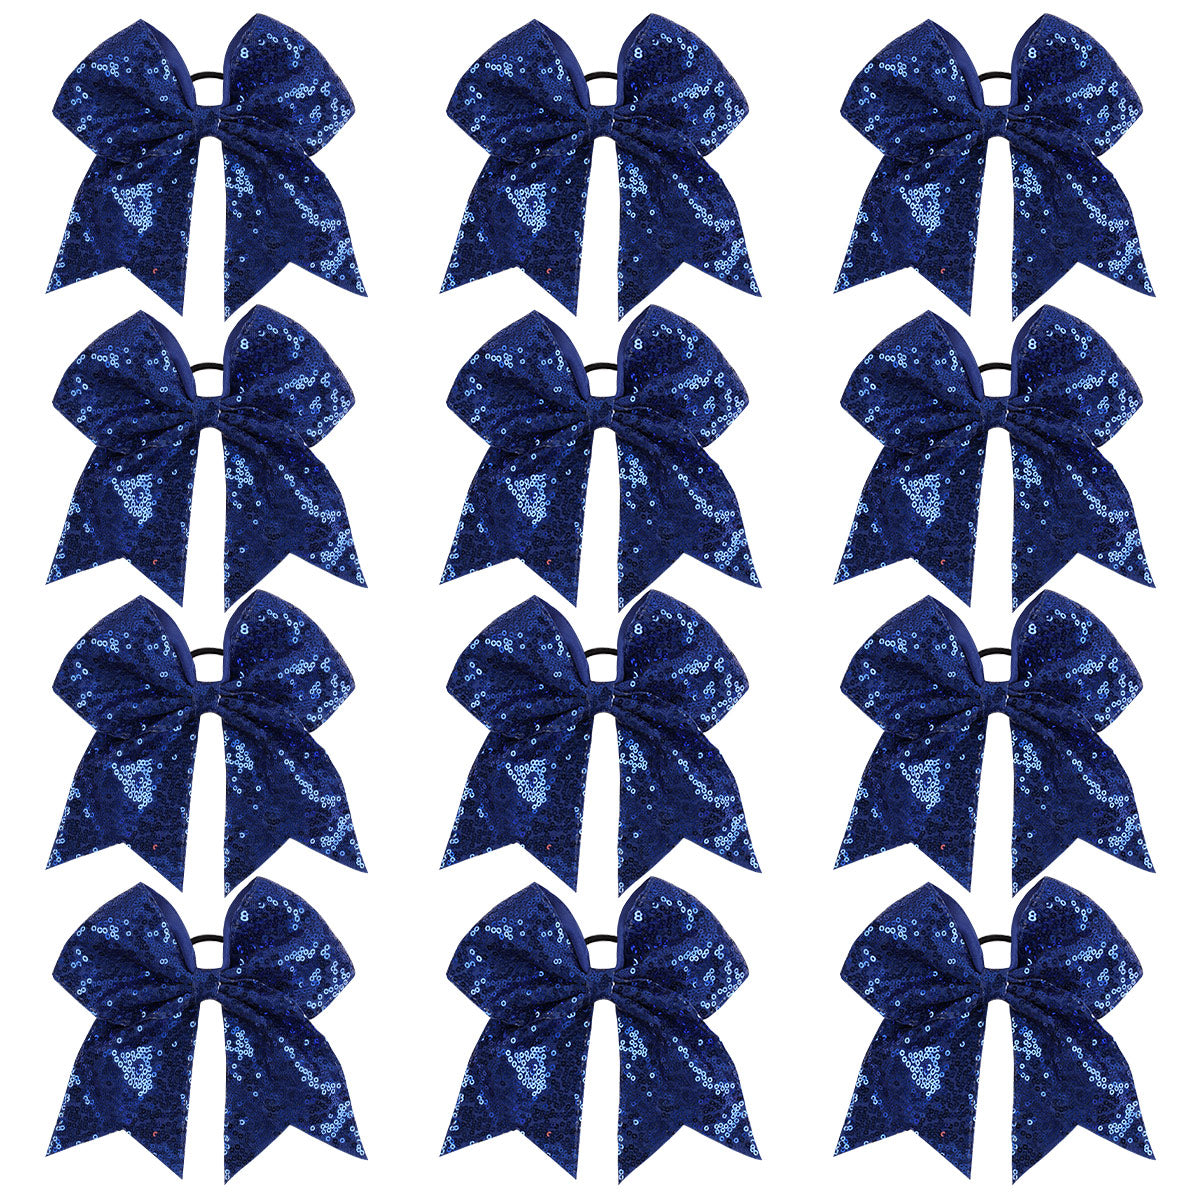 Blue Sequin Cheer Bows for Teen Girls